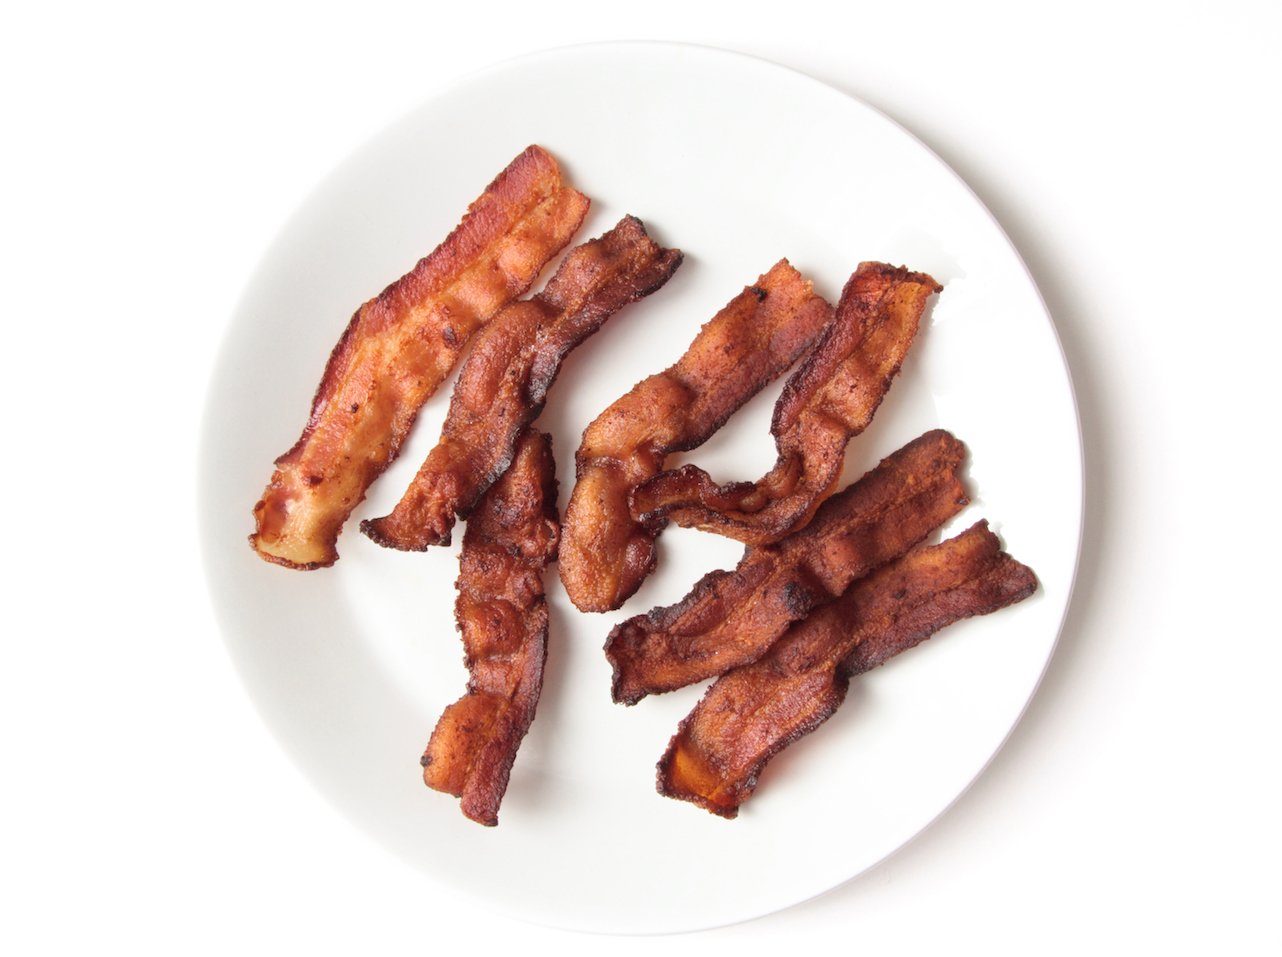 crisp bacon on a white plate (cook bacon in the oven for perfect results)